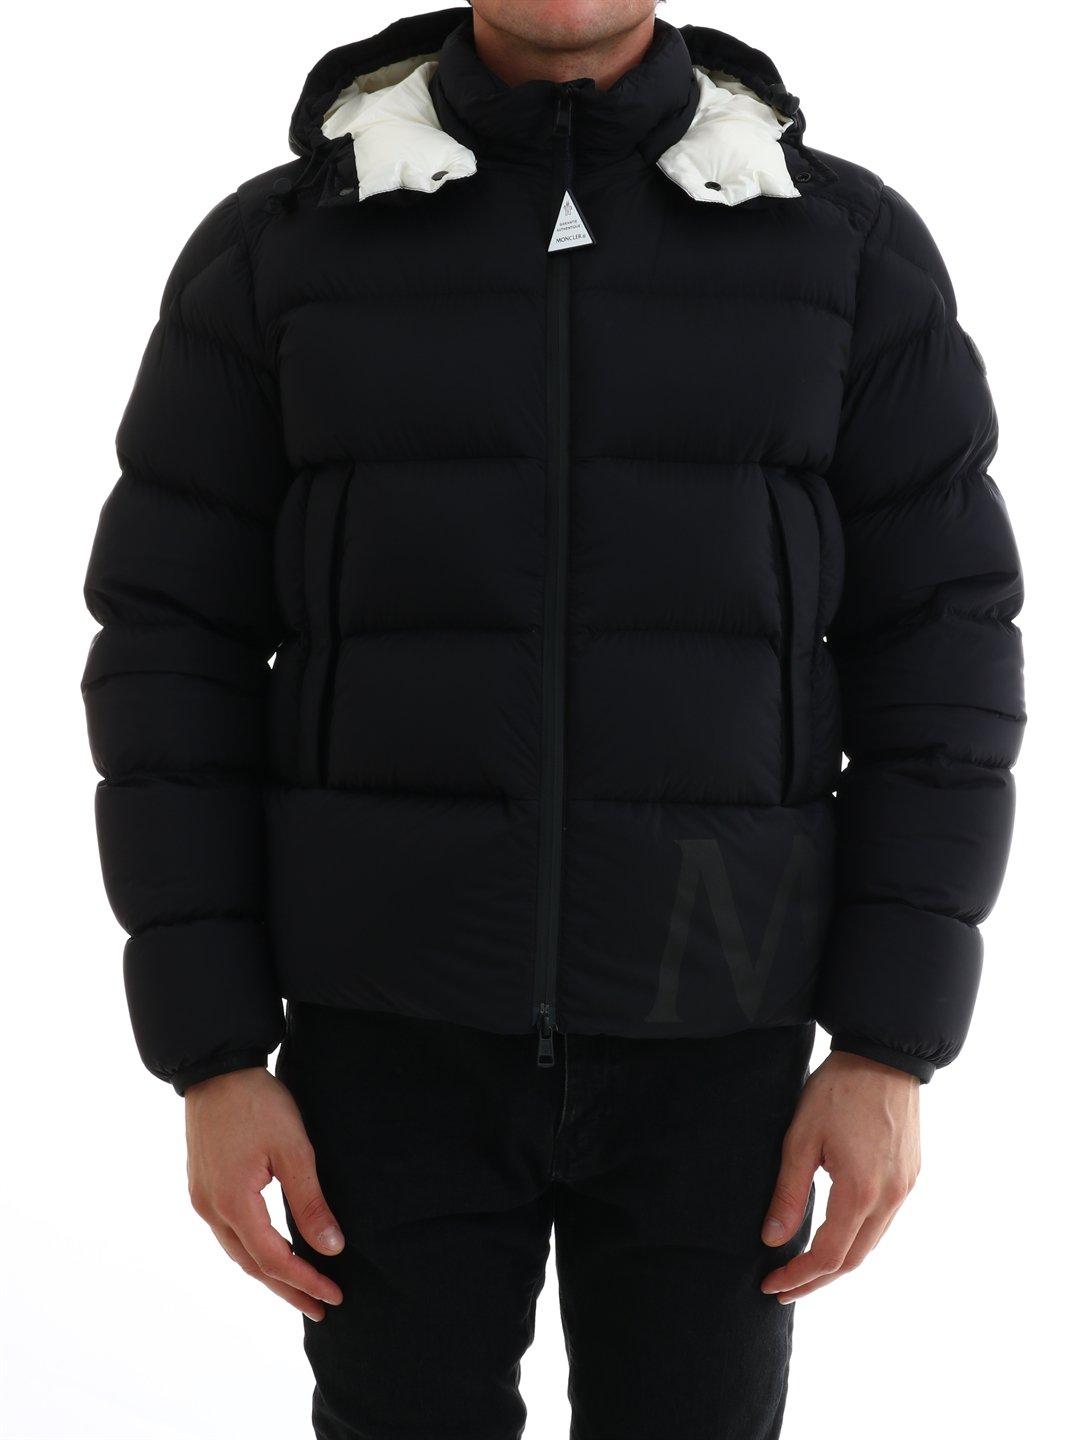 Moncler Synthetic Hooded Logo Puffer Jacket in Black for Men - Lyst